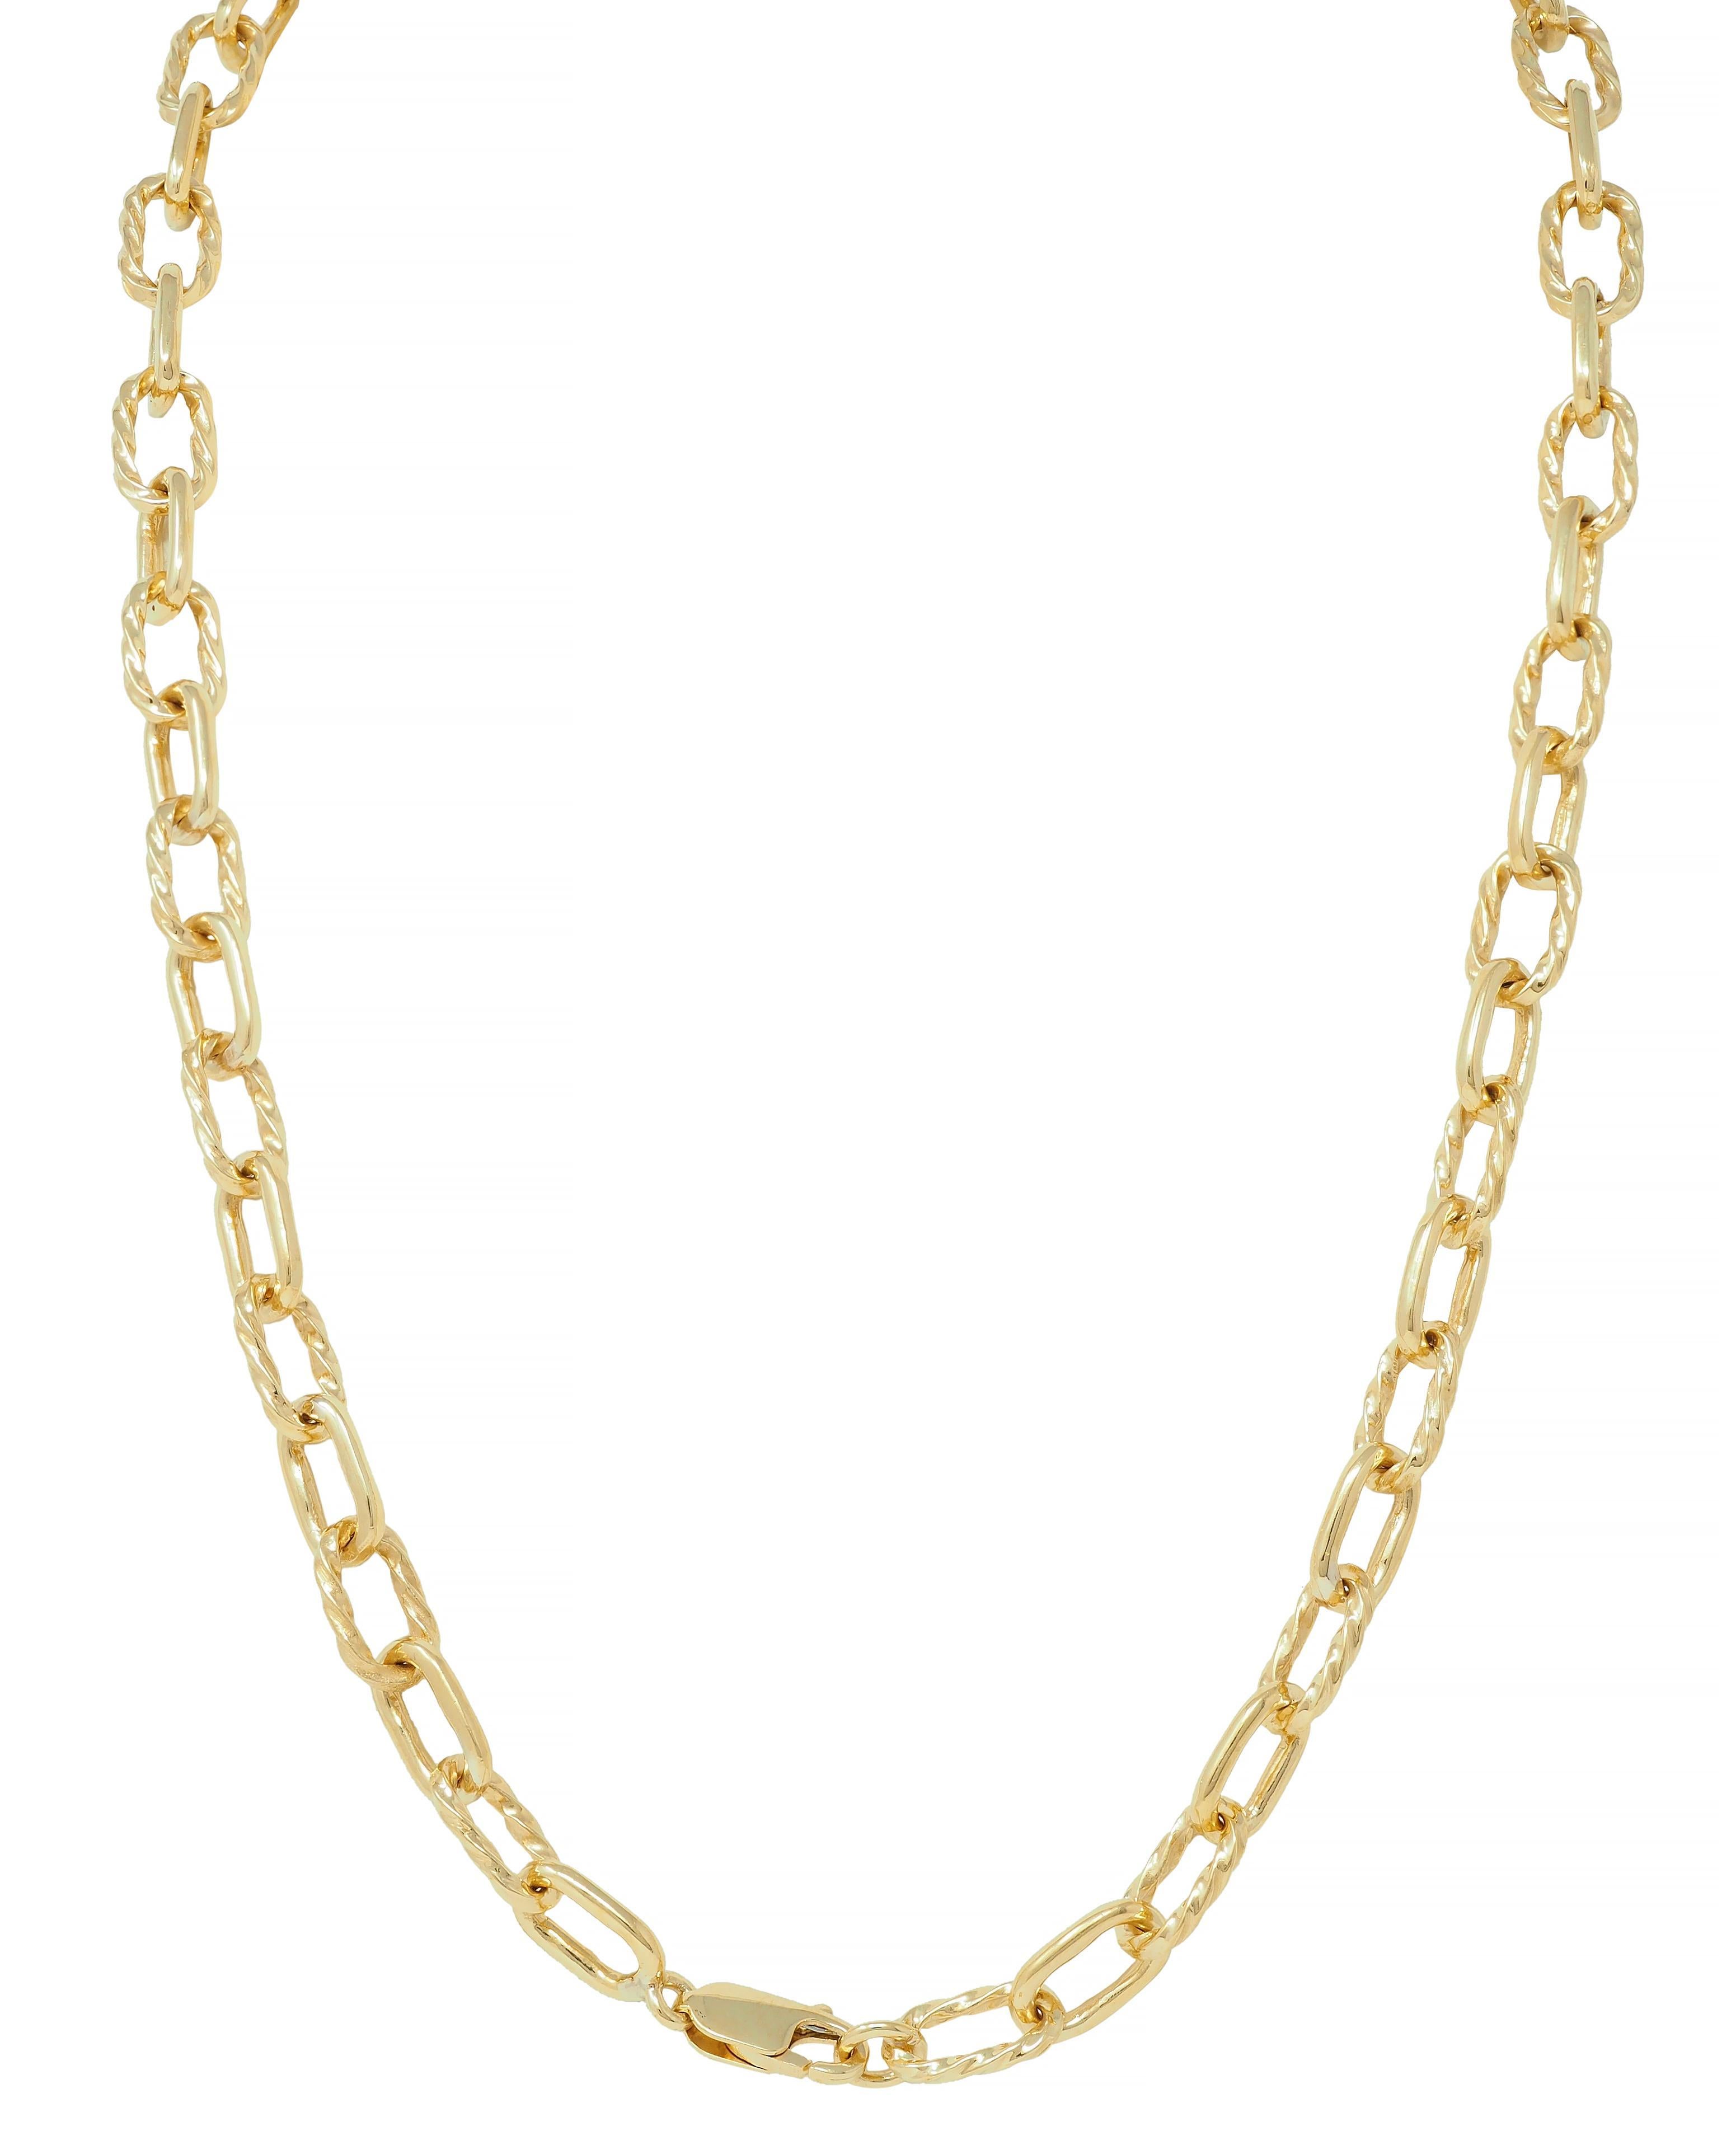 1960's 18 Karat Yellow Gold Twisted Cable Link Vintage Chain Necklace For Sale 3